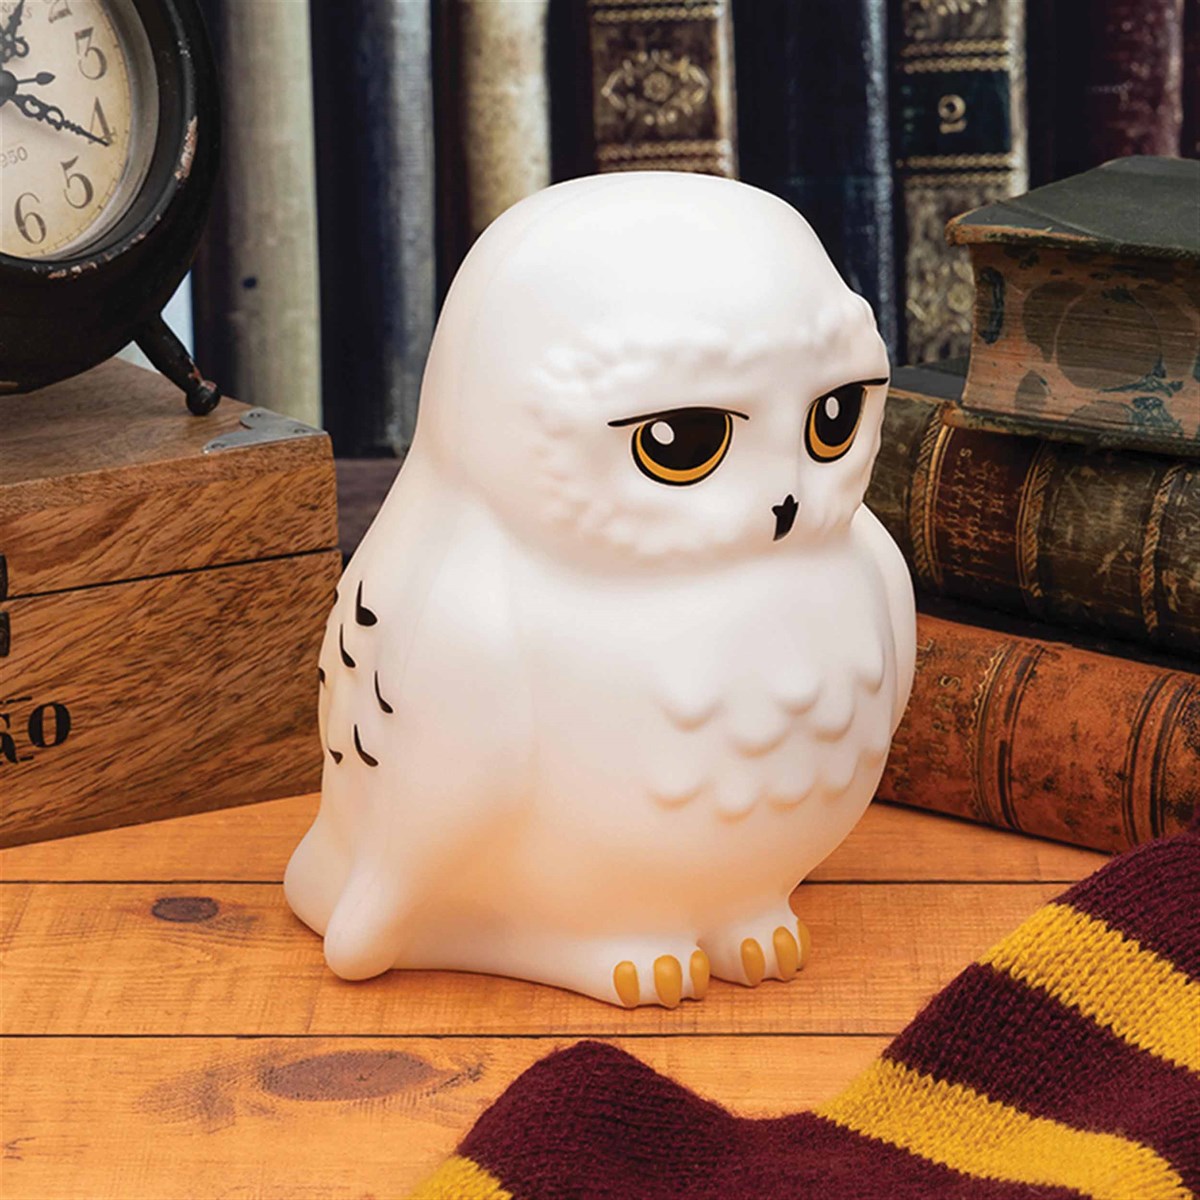 Harry Potter Puzzle 3D Image - Hedwig Snowy Owl 500 Jigsaw Puzzle Ages 6+ 